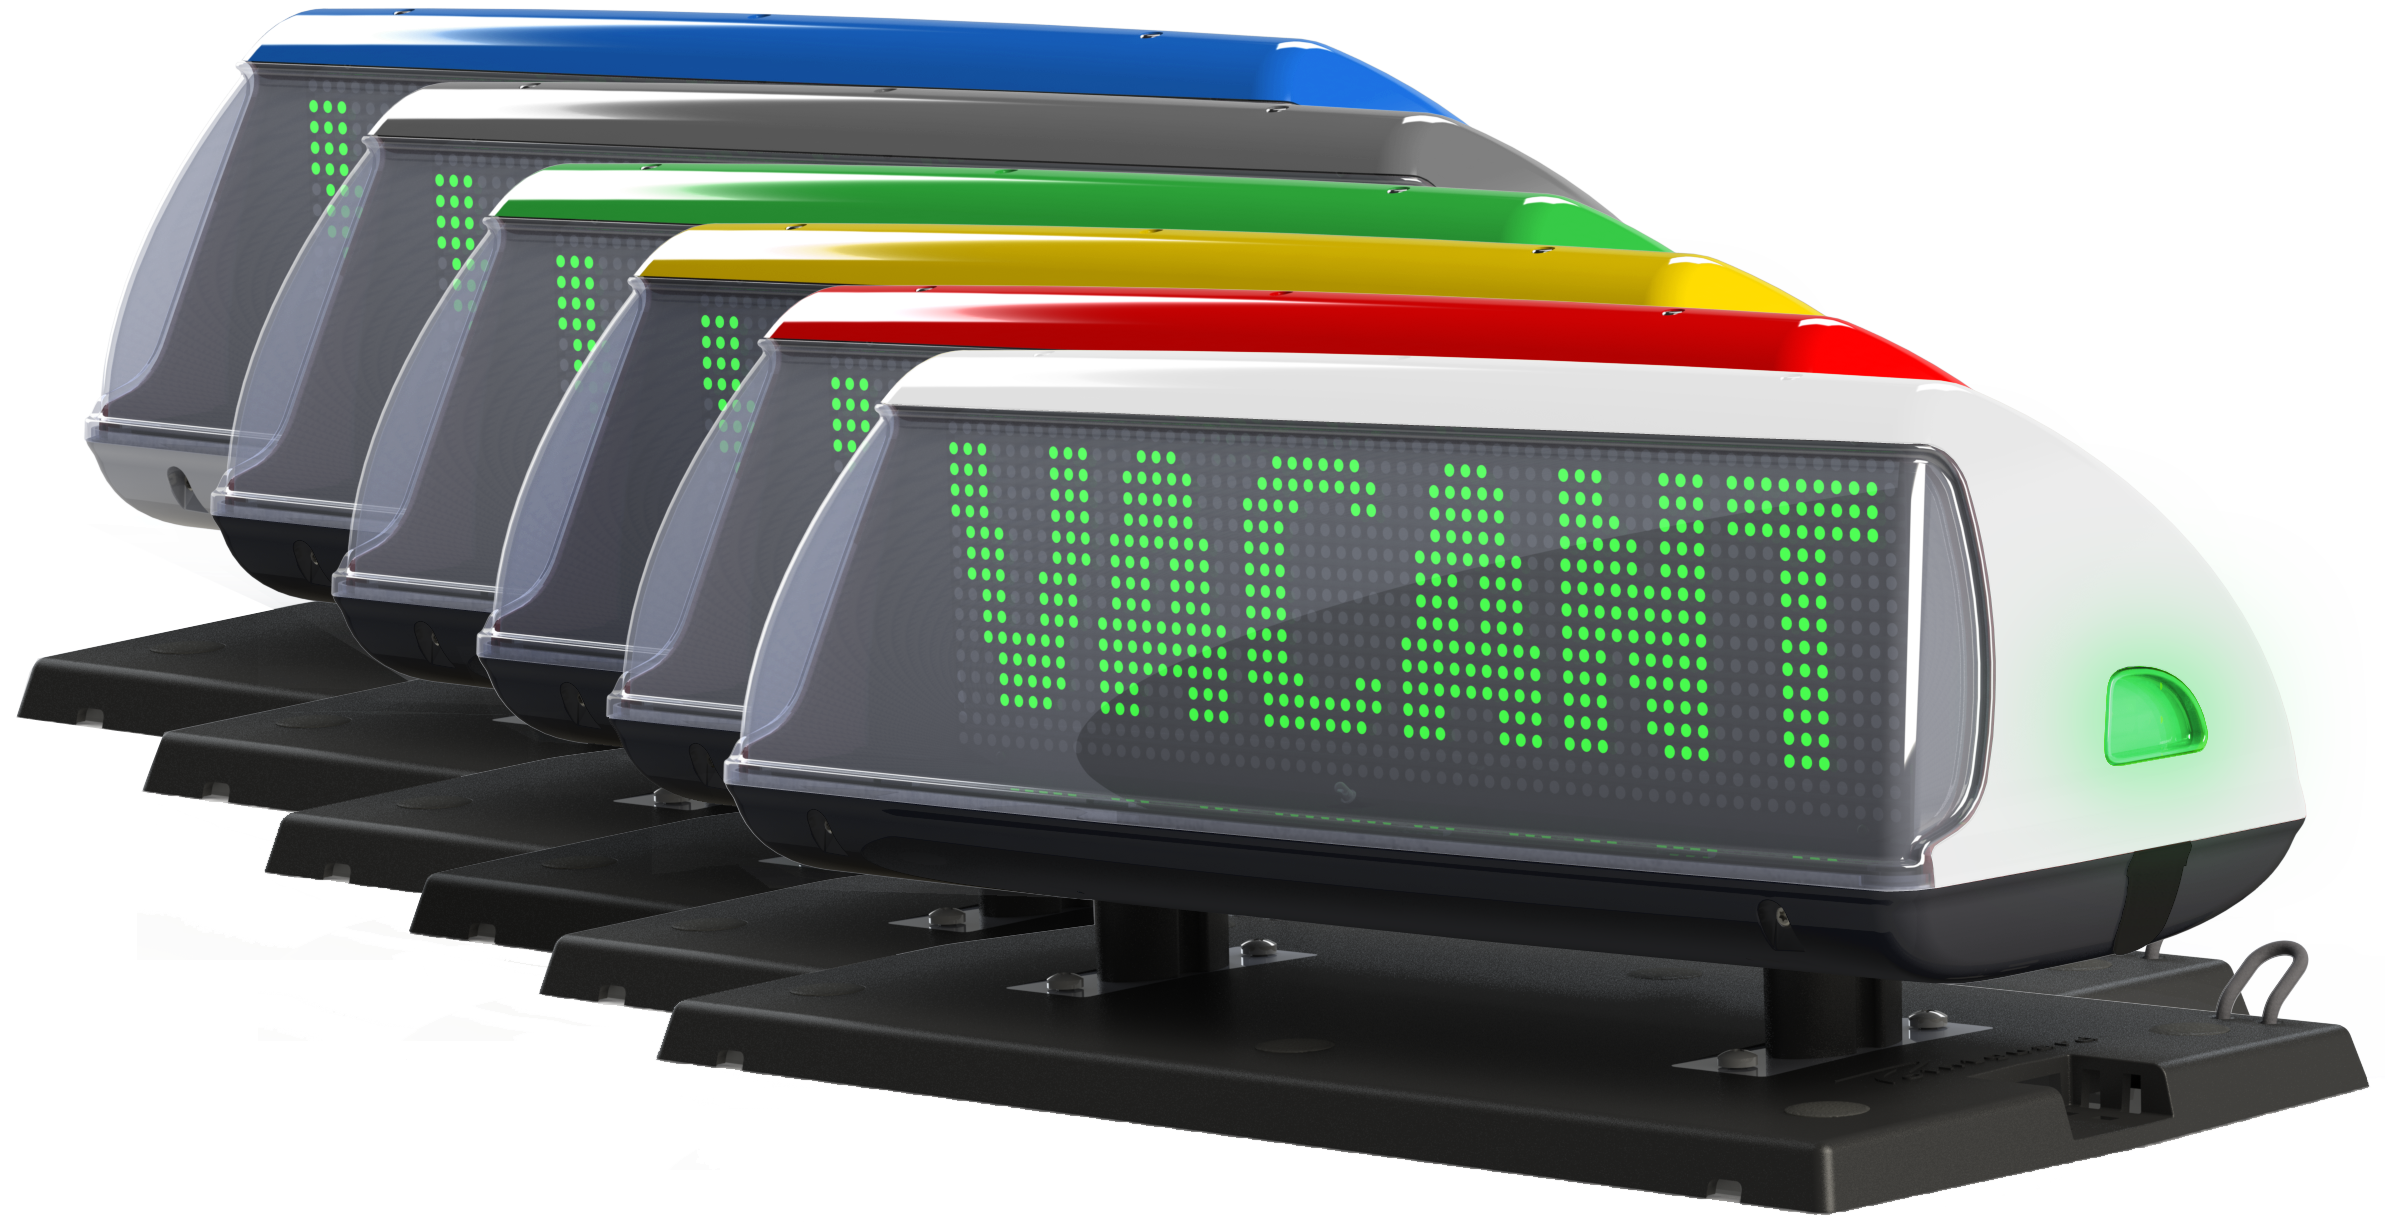 The iToplight taxi sign is available in all colors